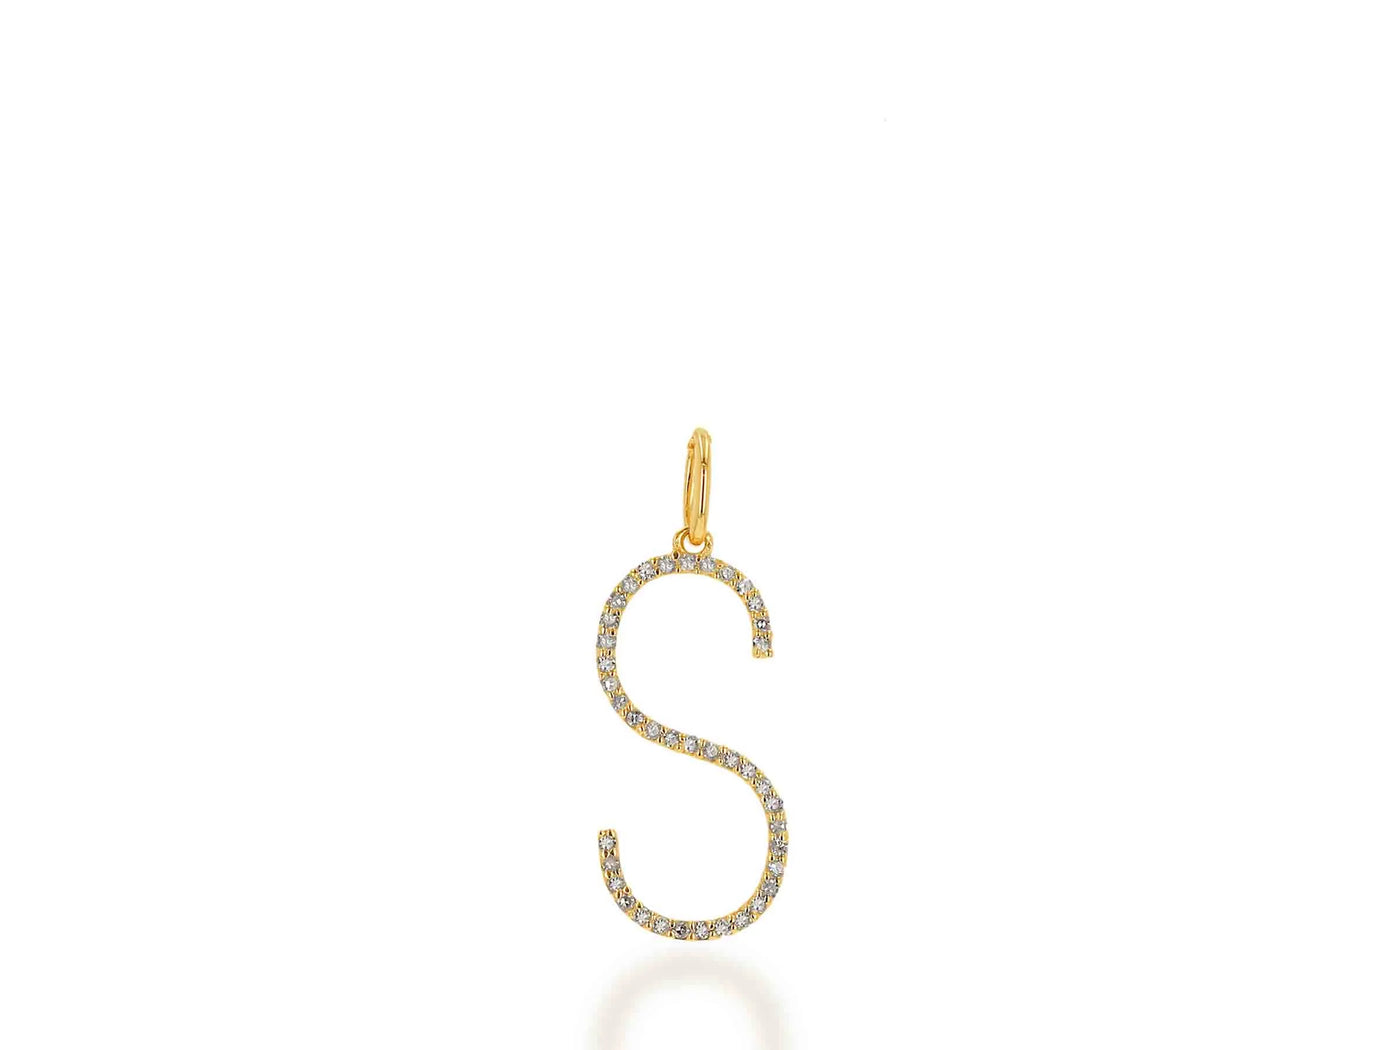 14K Oversized Diamond Letter "S" Charm Without Chain - Yellow Gold